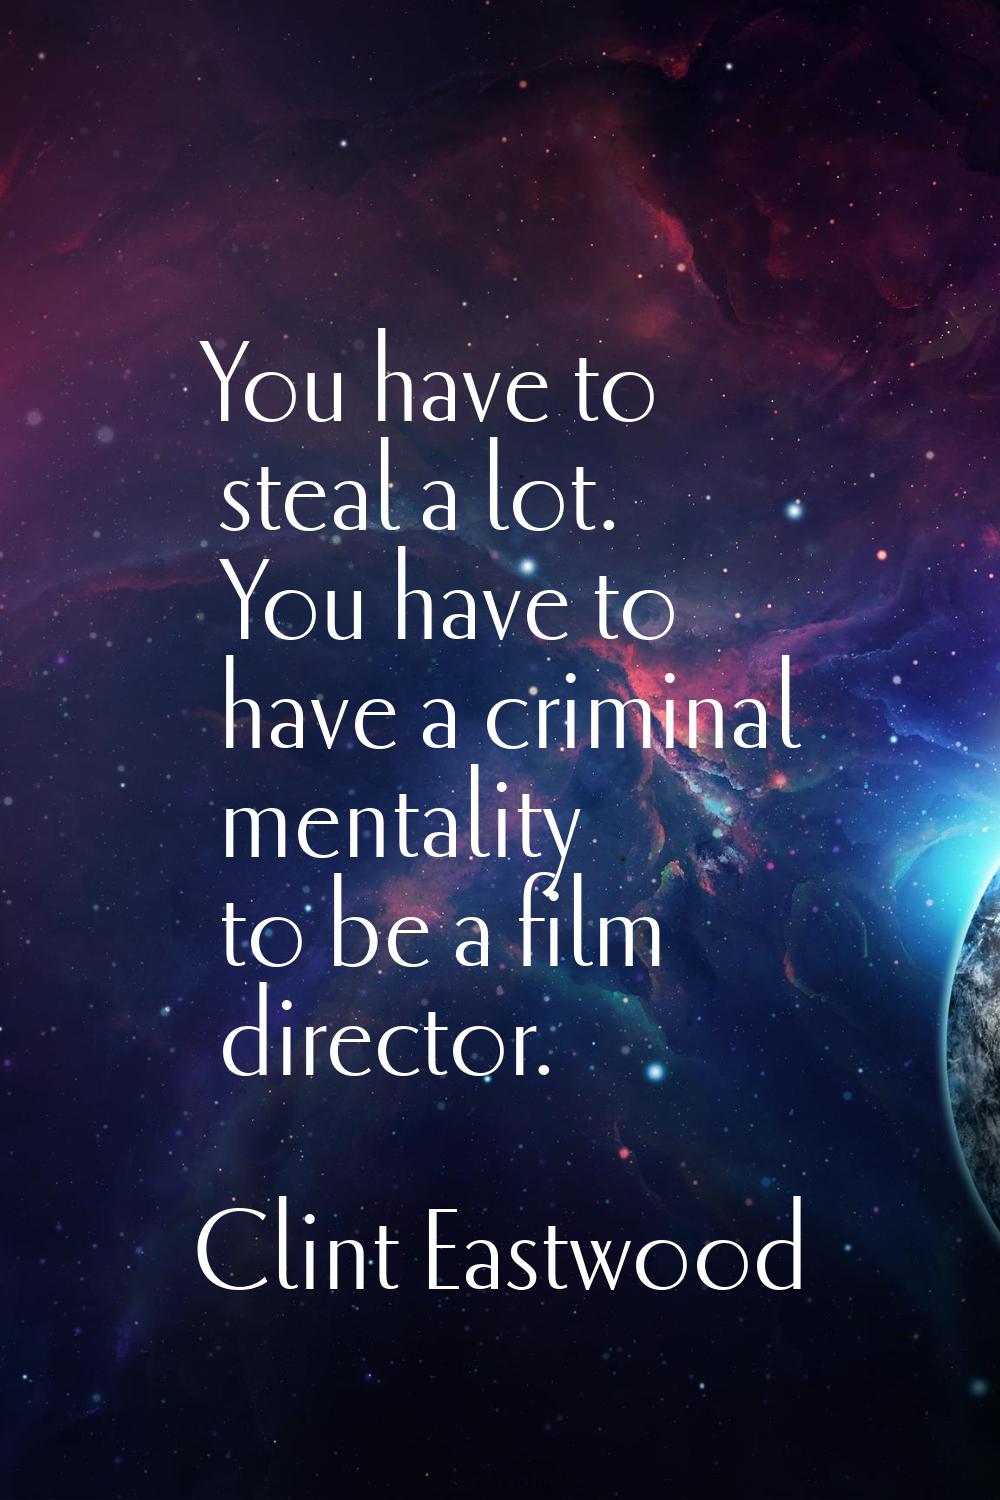 You have to steal a lot. You have to have a criminal mentality to be a film director.